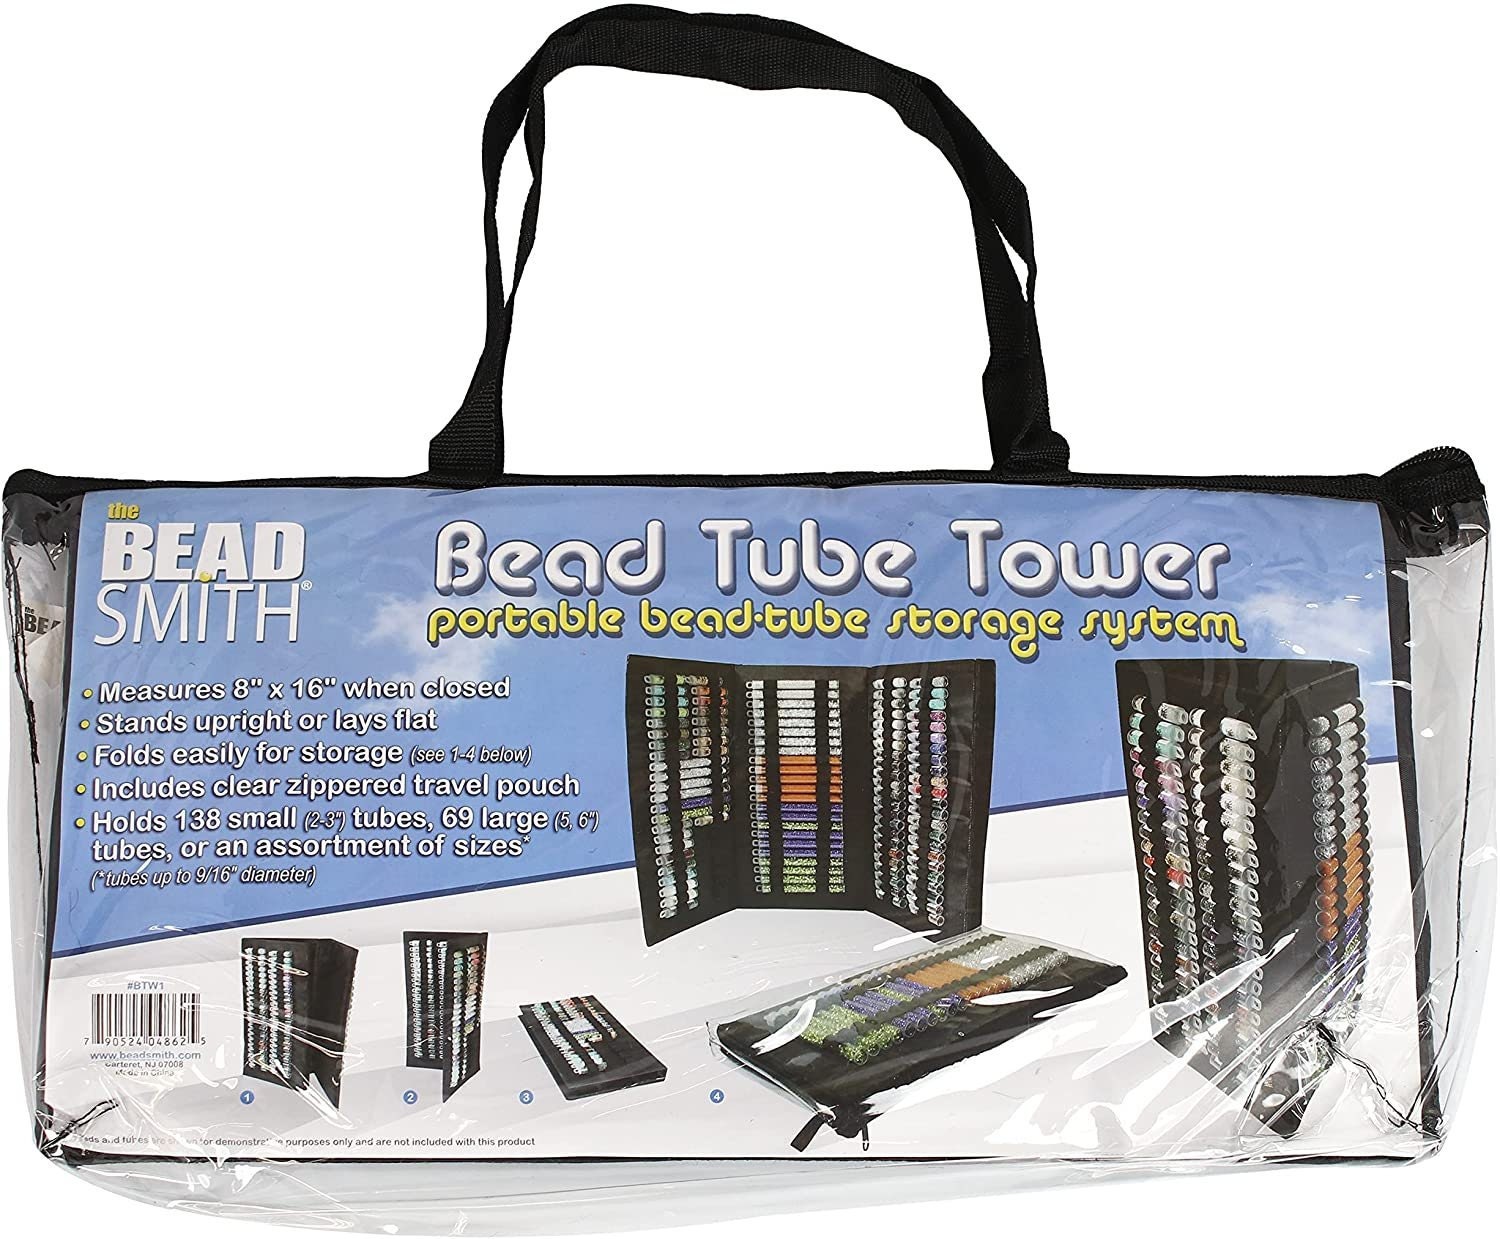 Zippered Travel Pouches for 2 Dram Tubes